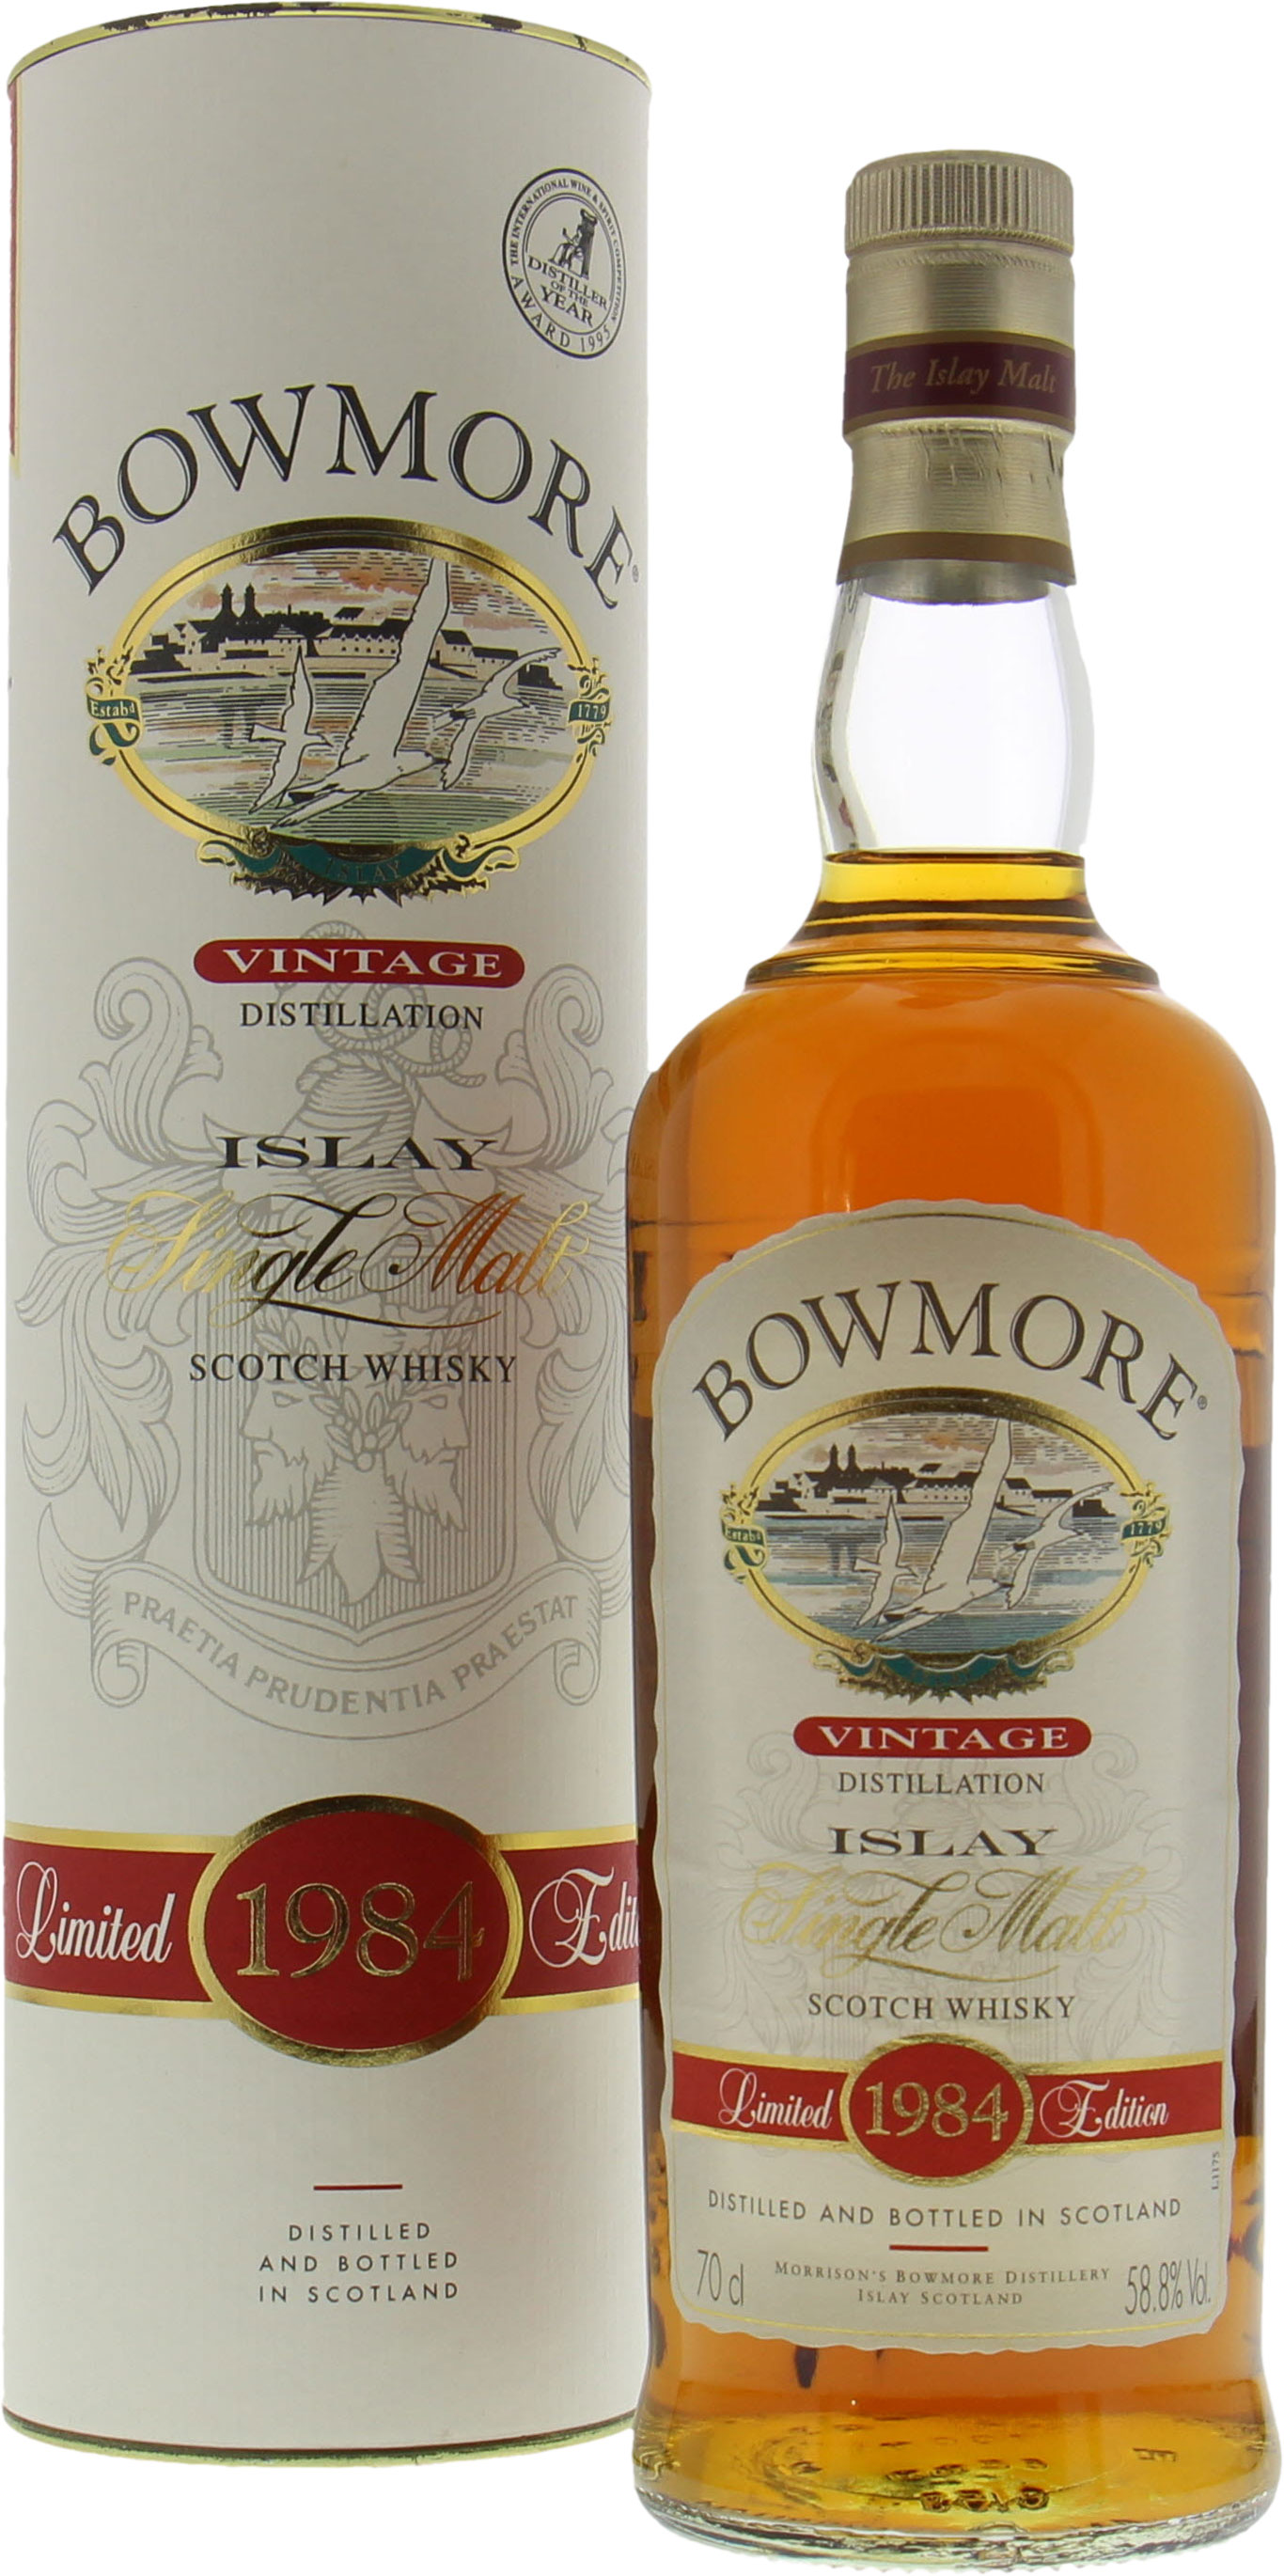 Bowmore - Vintage 1984 58.8% 1984 In Orginal Container